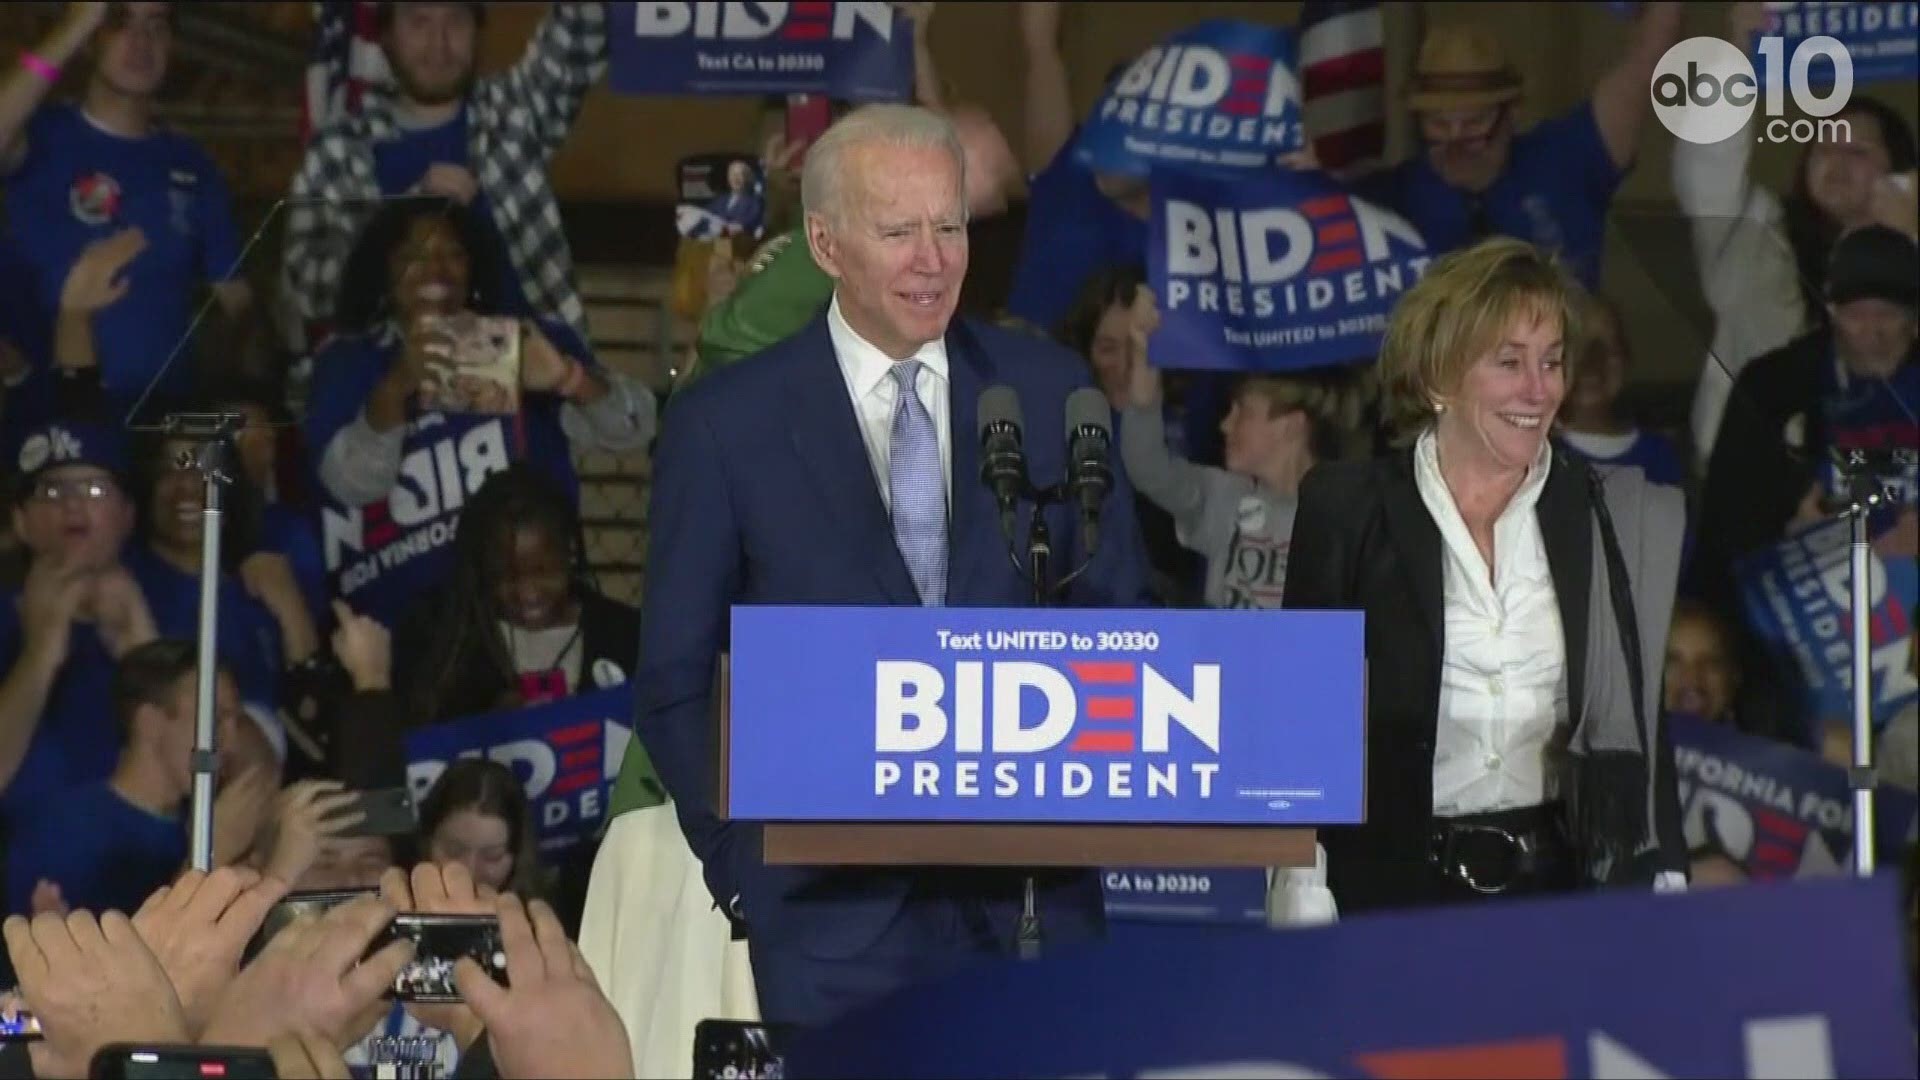 Joe Biden addresses his supporters after being declared winner in multiple super Tuesday states.